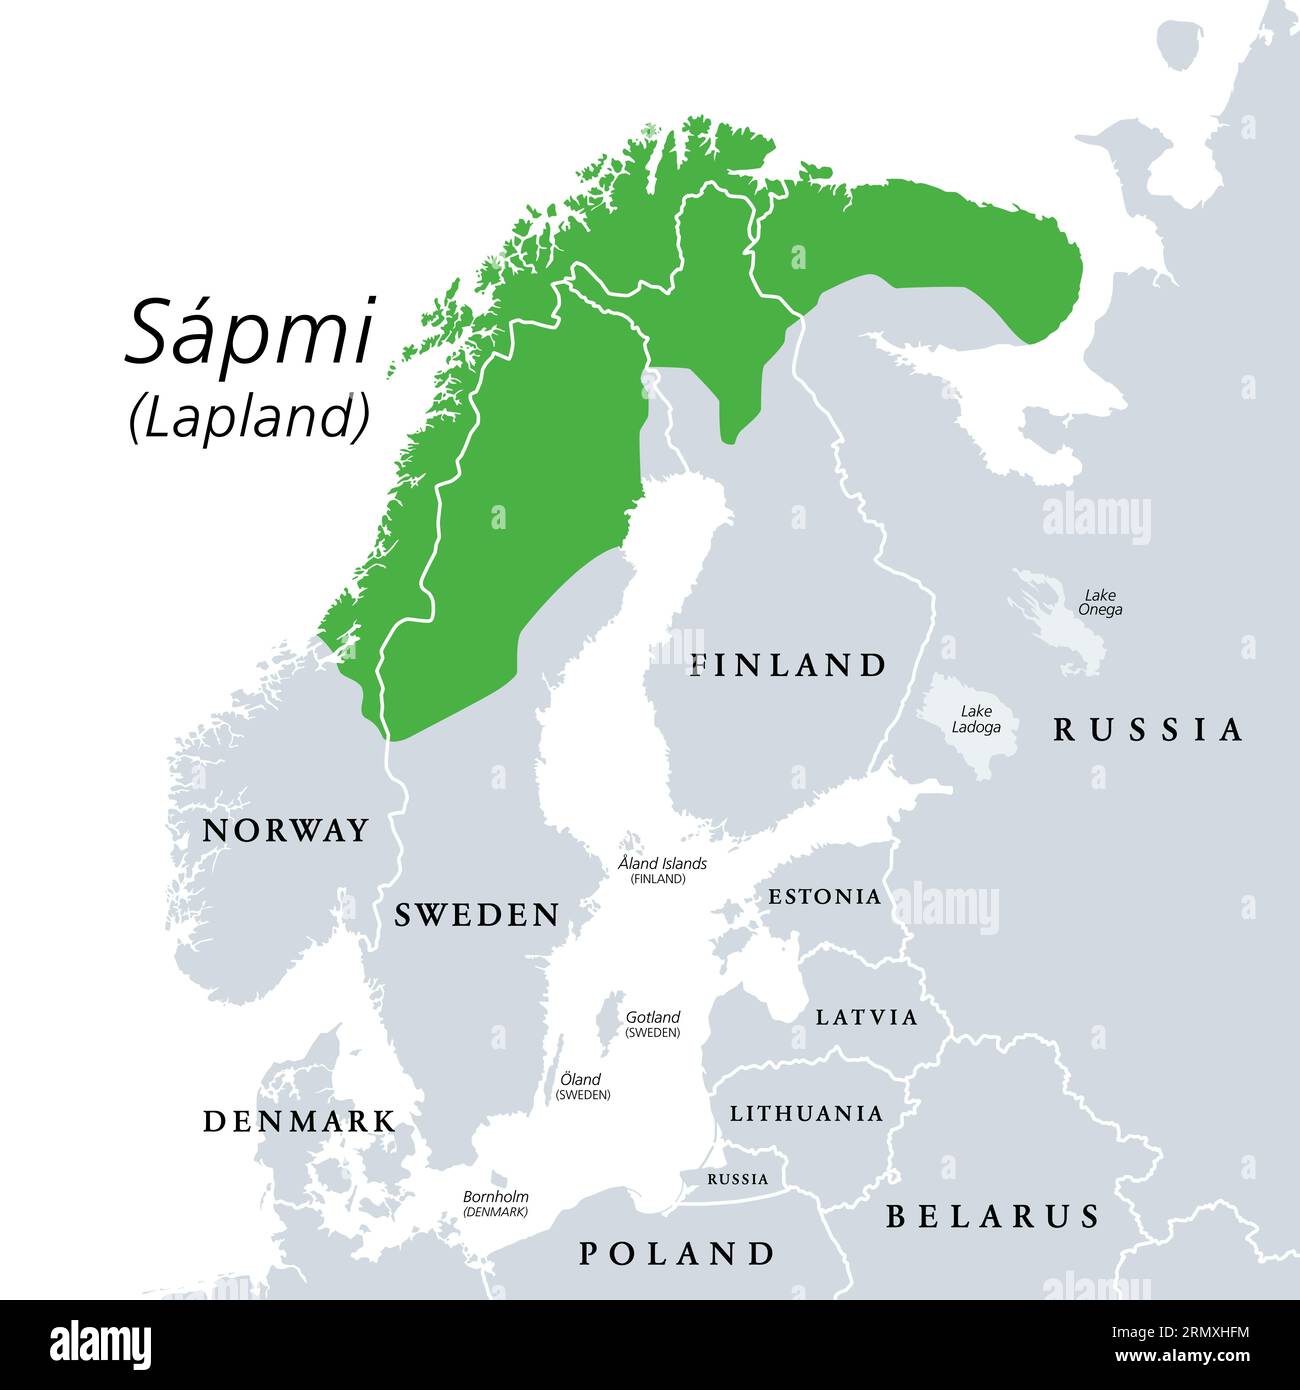 Sapmi, Lapland, gray political map. Cultural region in Northern and Eastern Europe, including the northern parts of Fennoscandia. Stock Photo